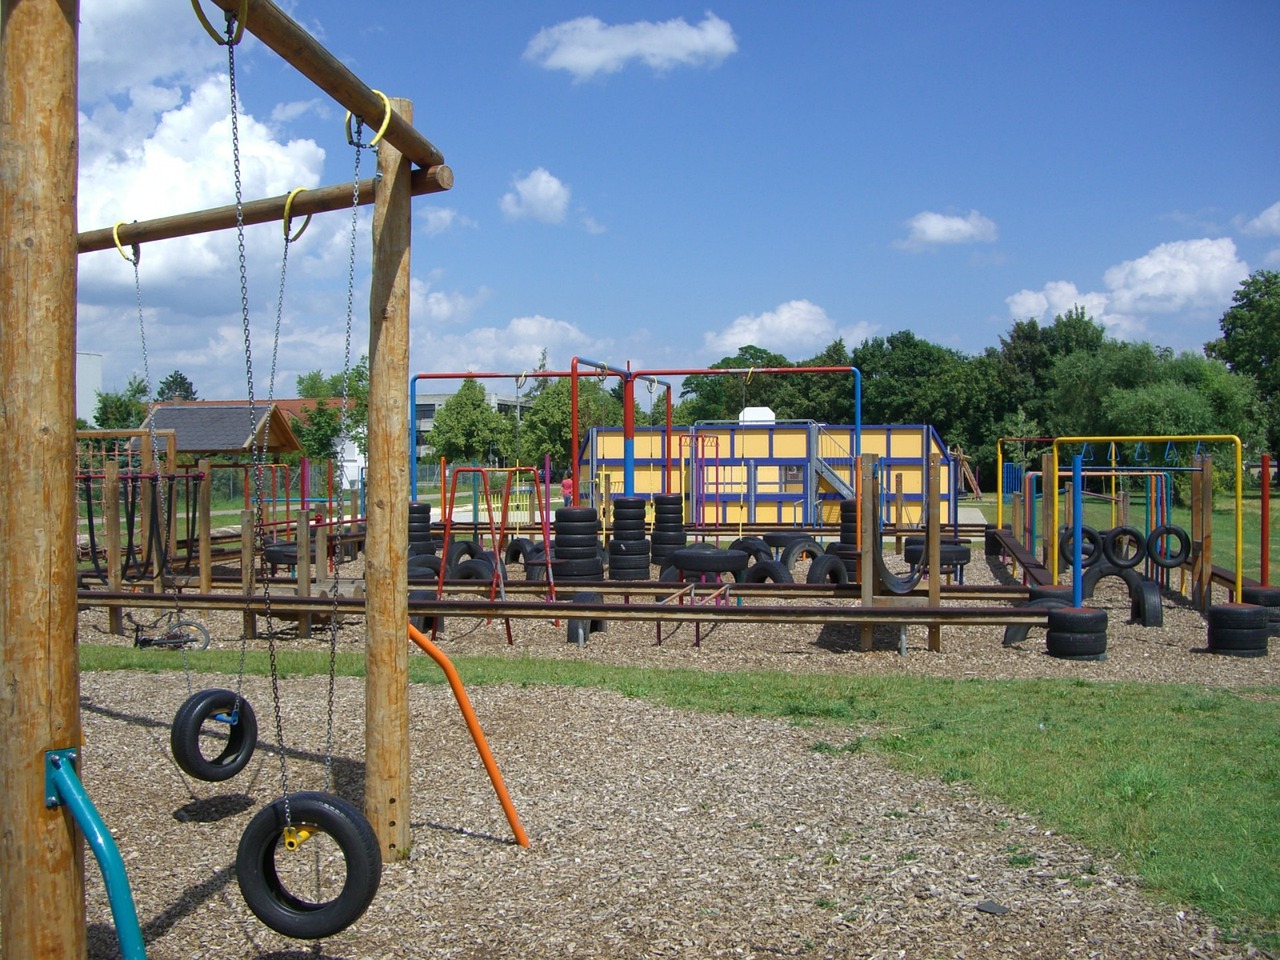 Featured image for the project, Assessing Scientific Data to Create Safer Playgrounds And Community Environments